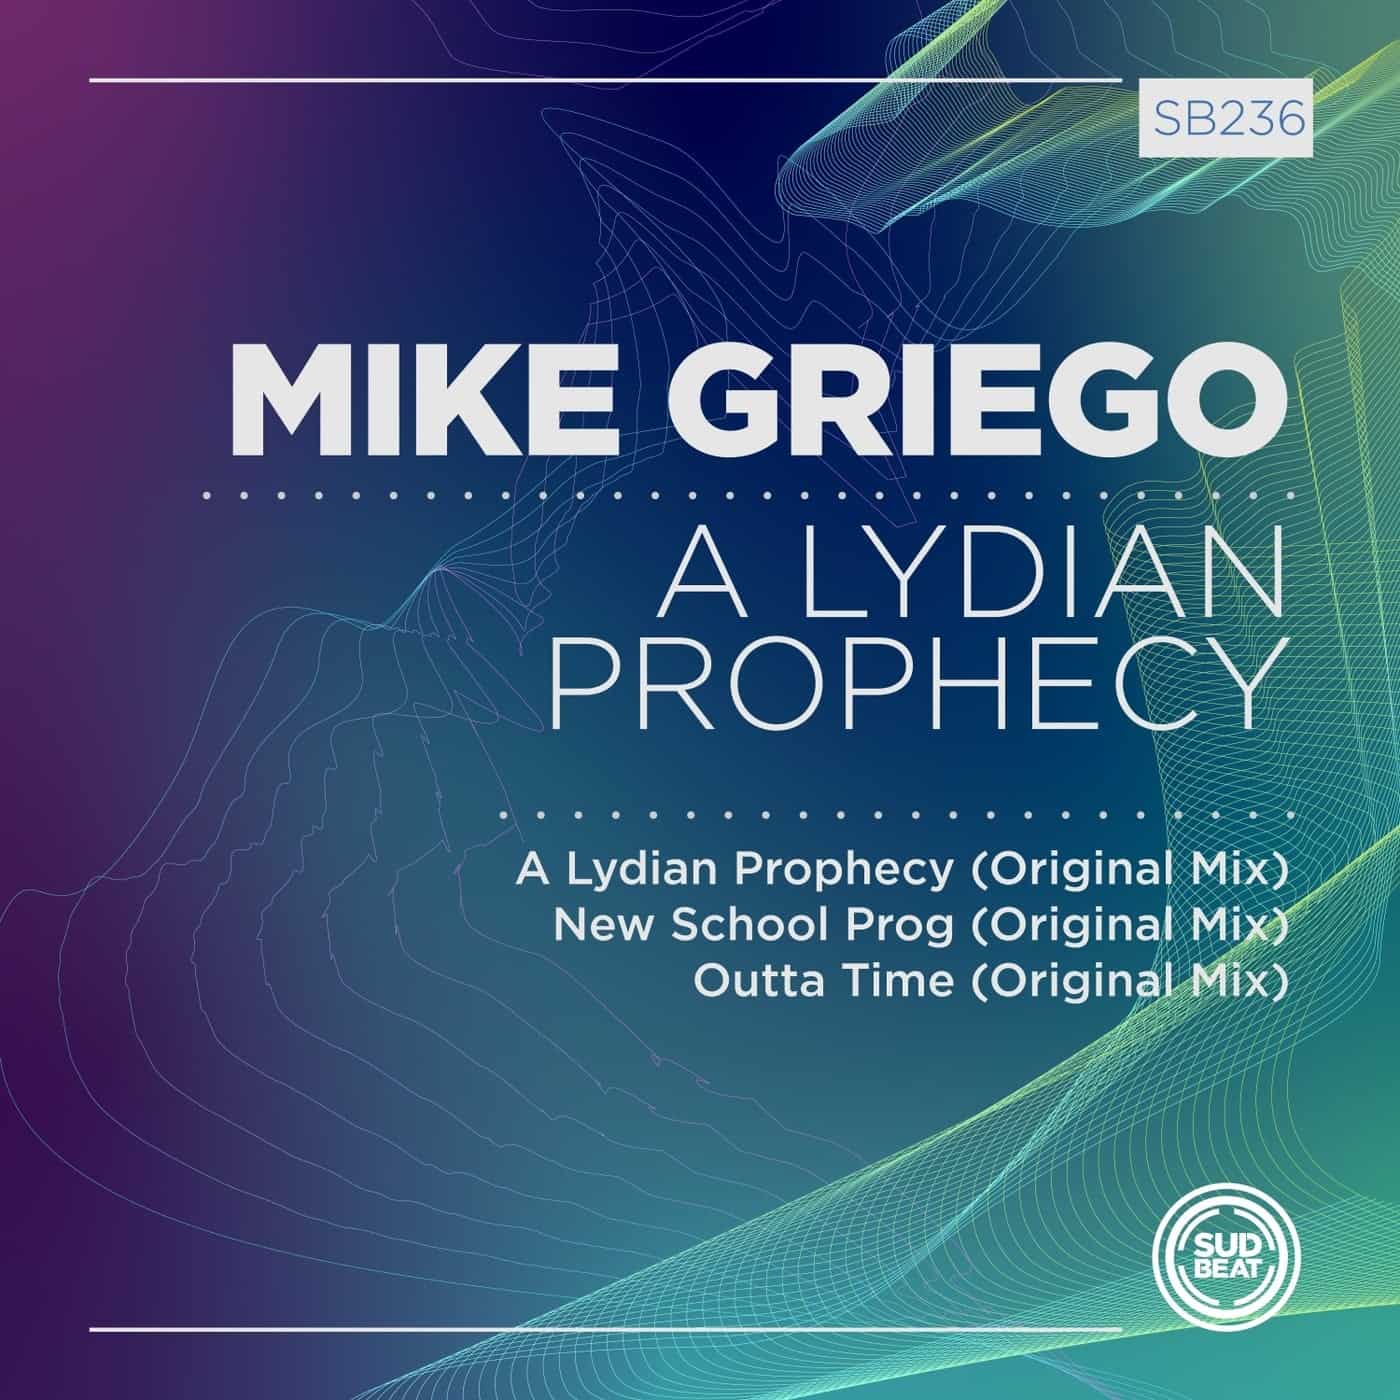 image cover: A Lydian Prophecy by Mike Griego on Sudbeat Music